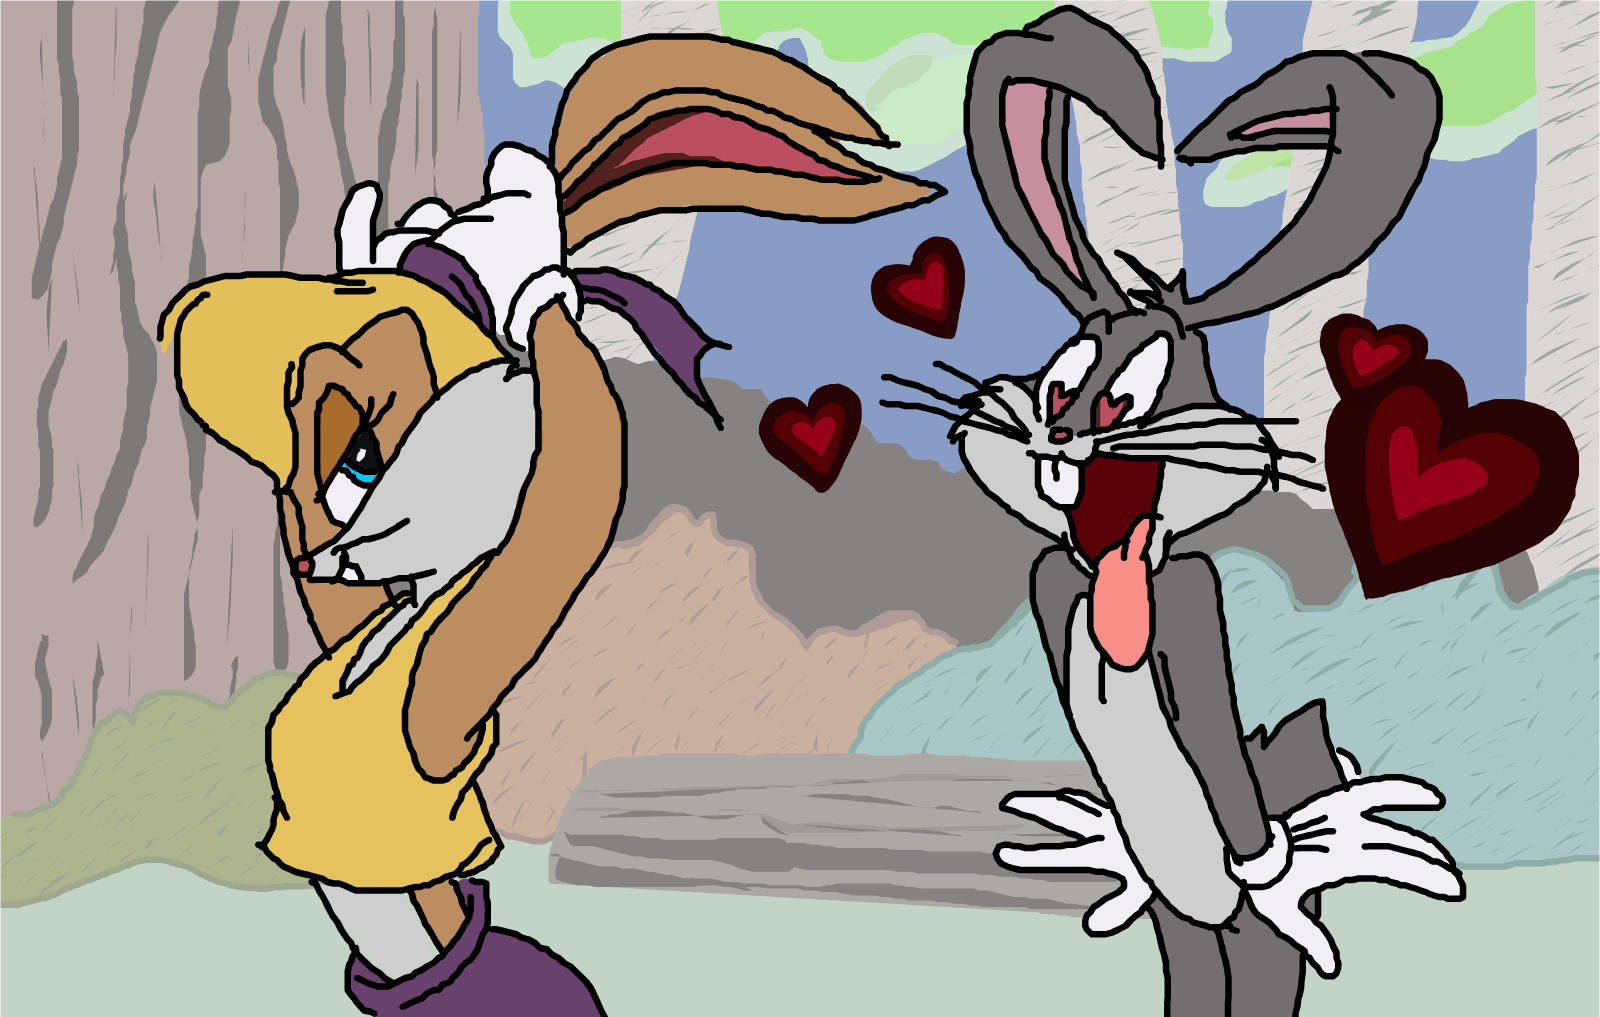 Bugs Bunny wallpapers, Cartoon, HQ Bugs Bunny pictures.